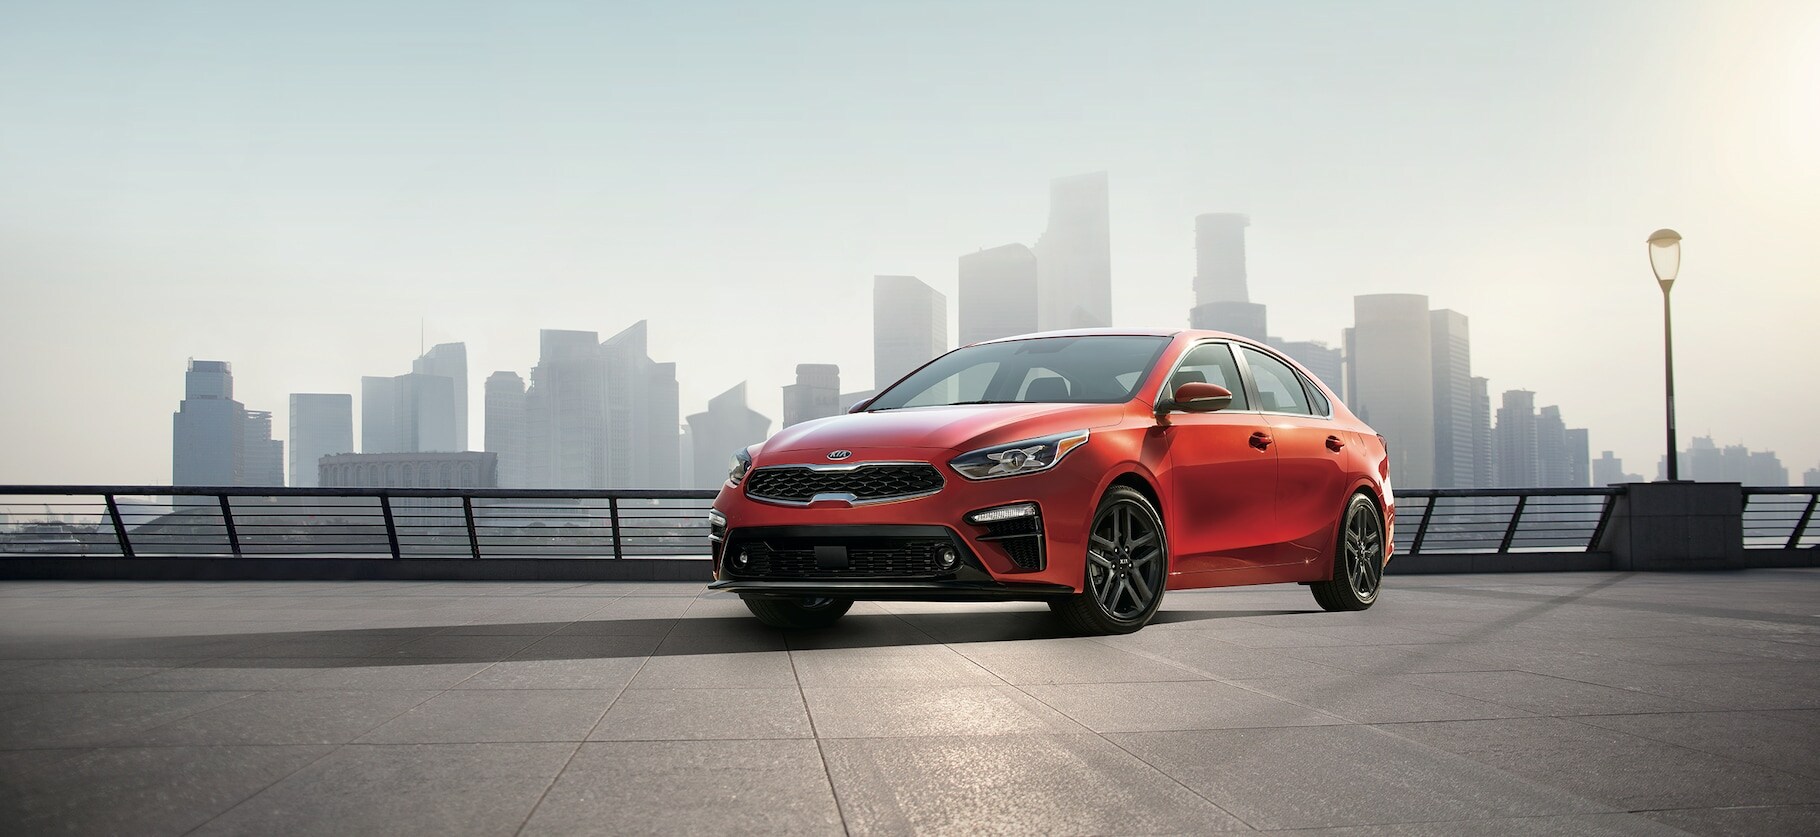 2019 Kia Forte driving on forest road